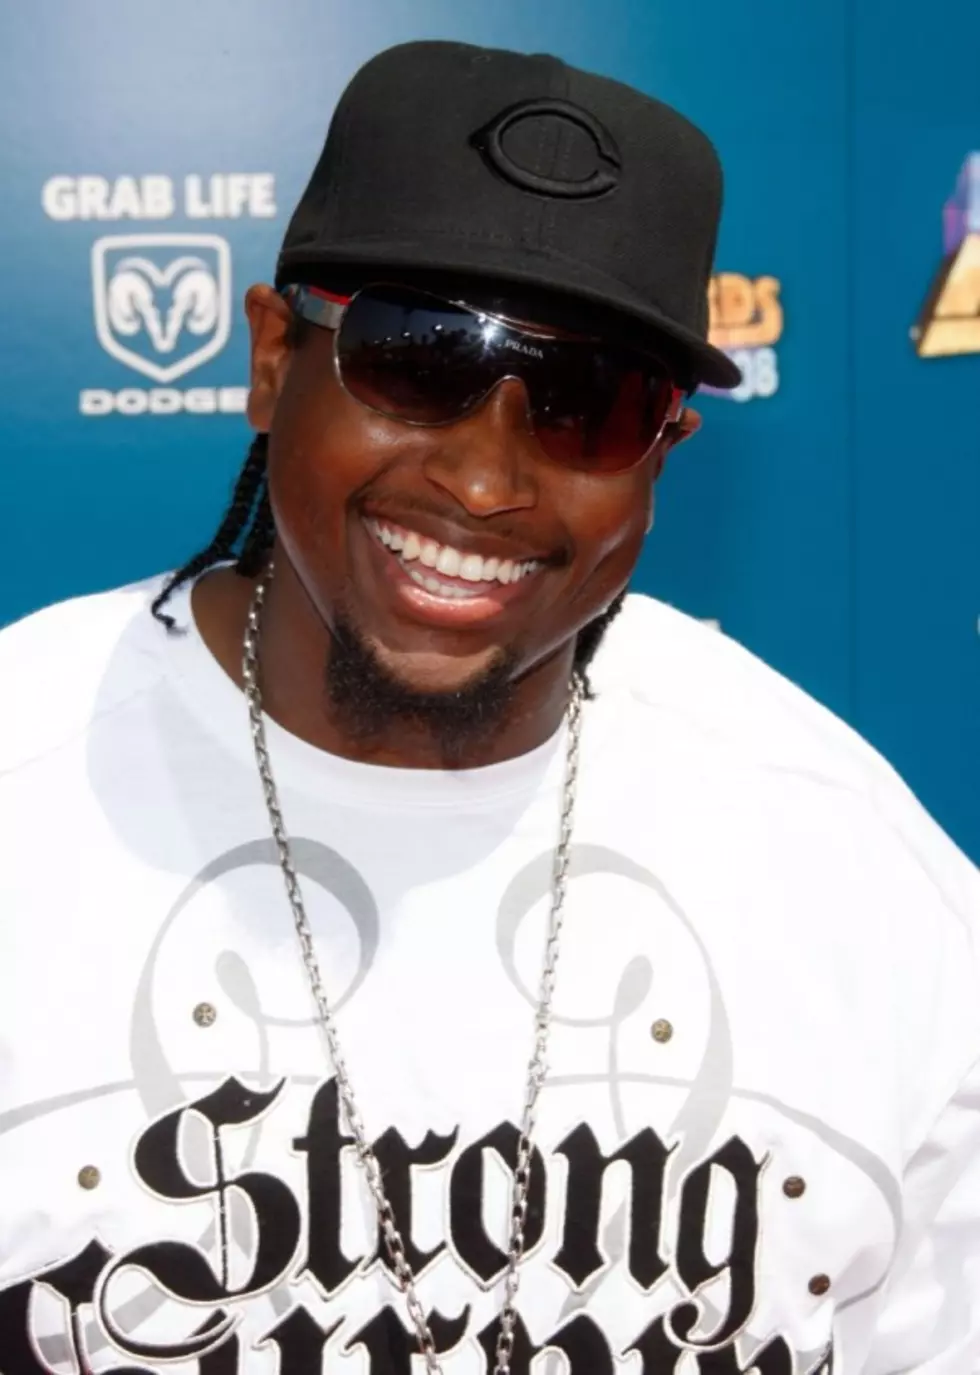 Lil Eazy-E Shares His Opinion on Proposed HIV Bill